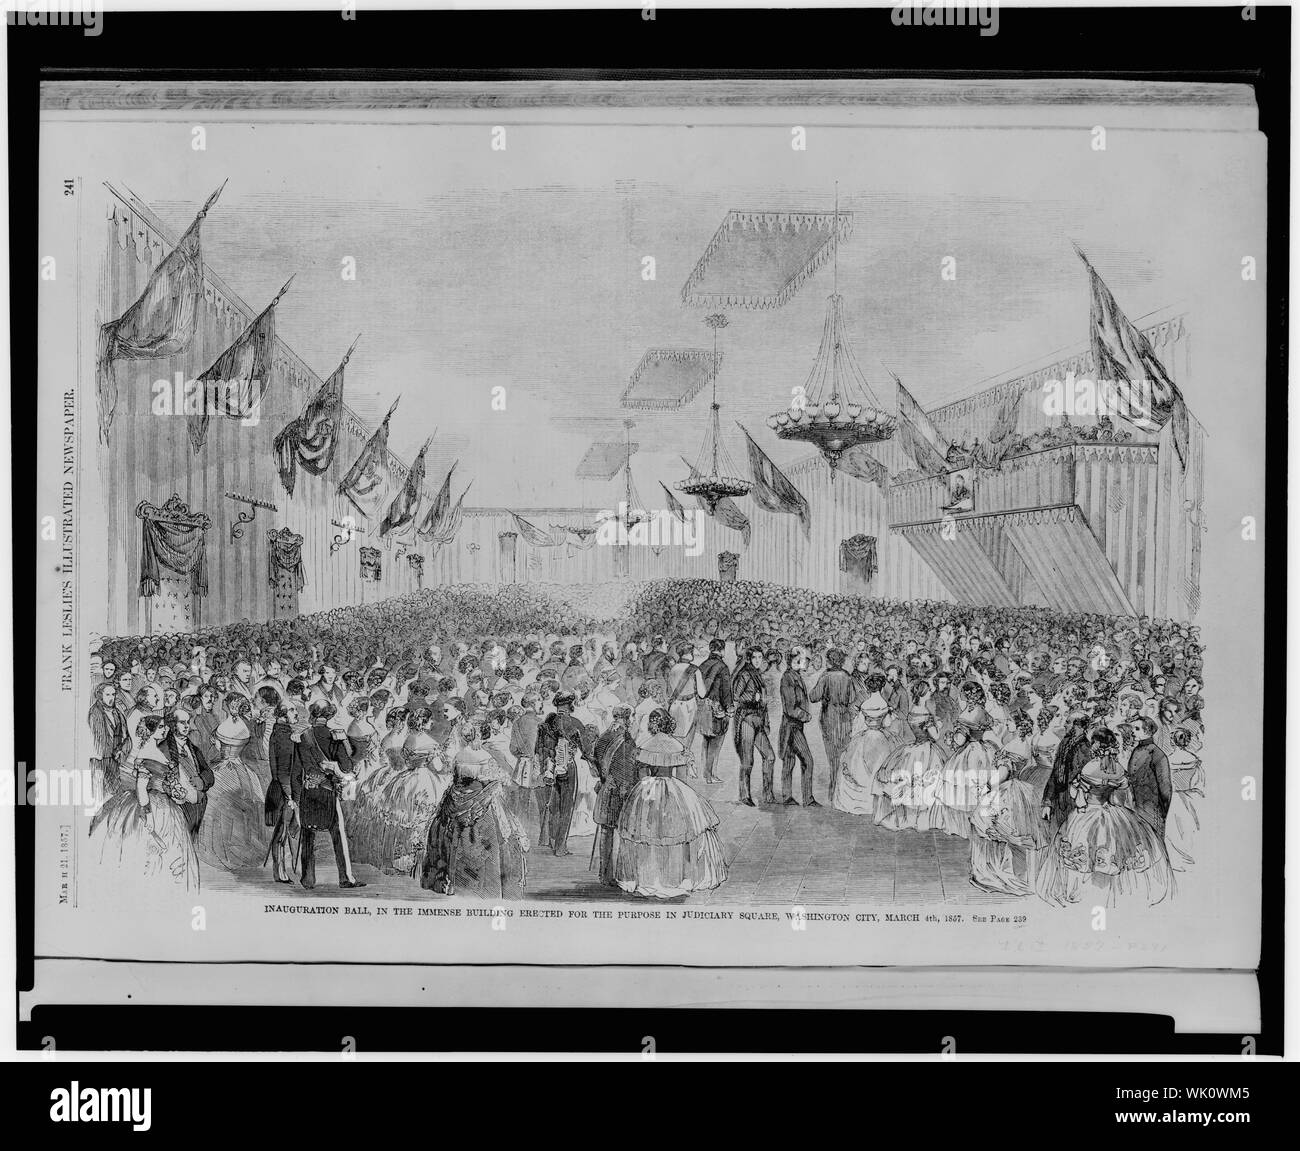 Inauguration ball in the immense building erected for the purpose in Judiciary Square, Washington City, March 4th, 1857 Stock Photo